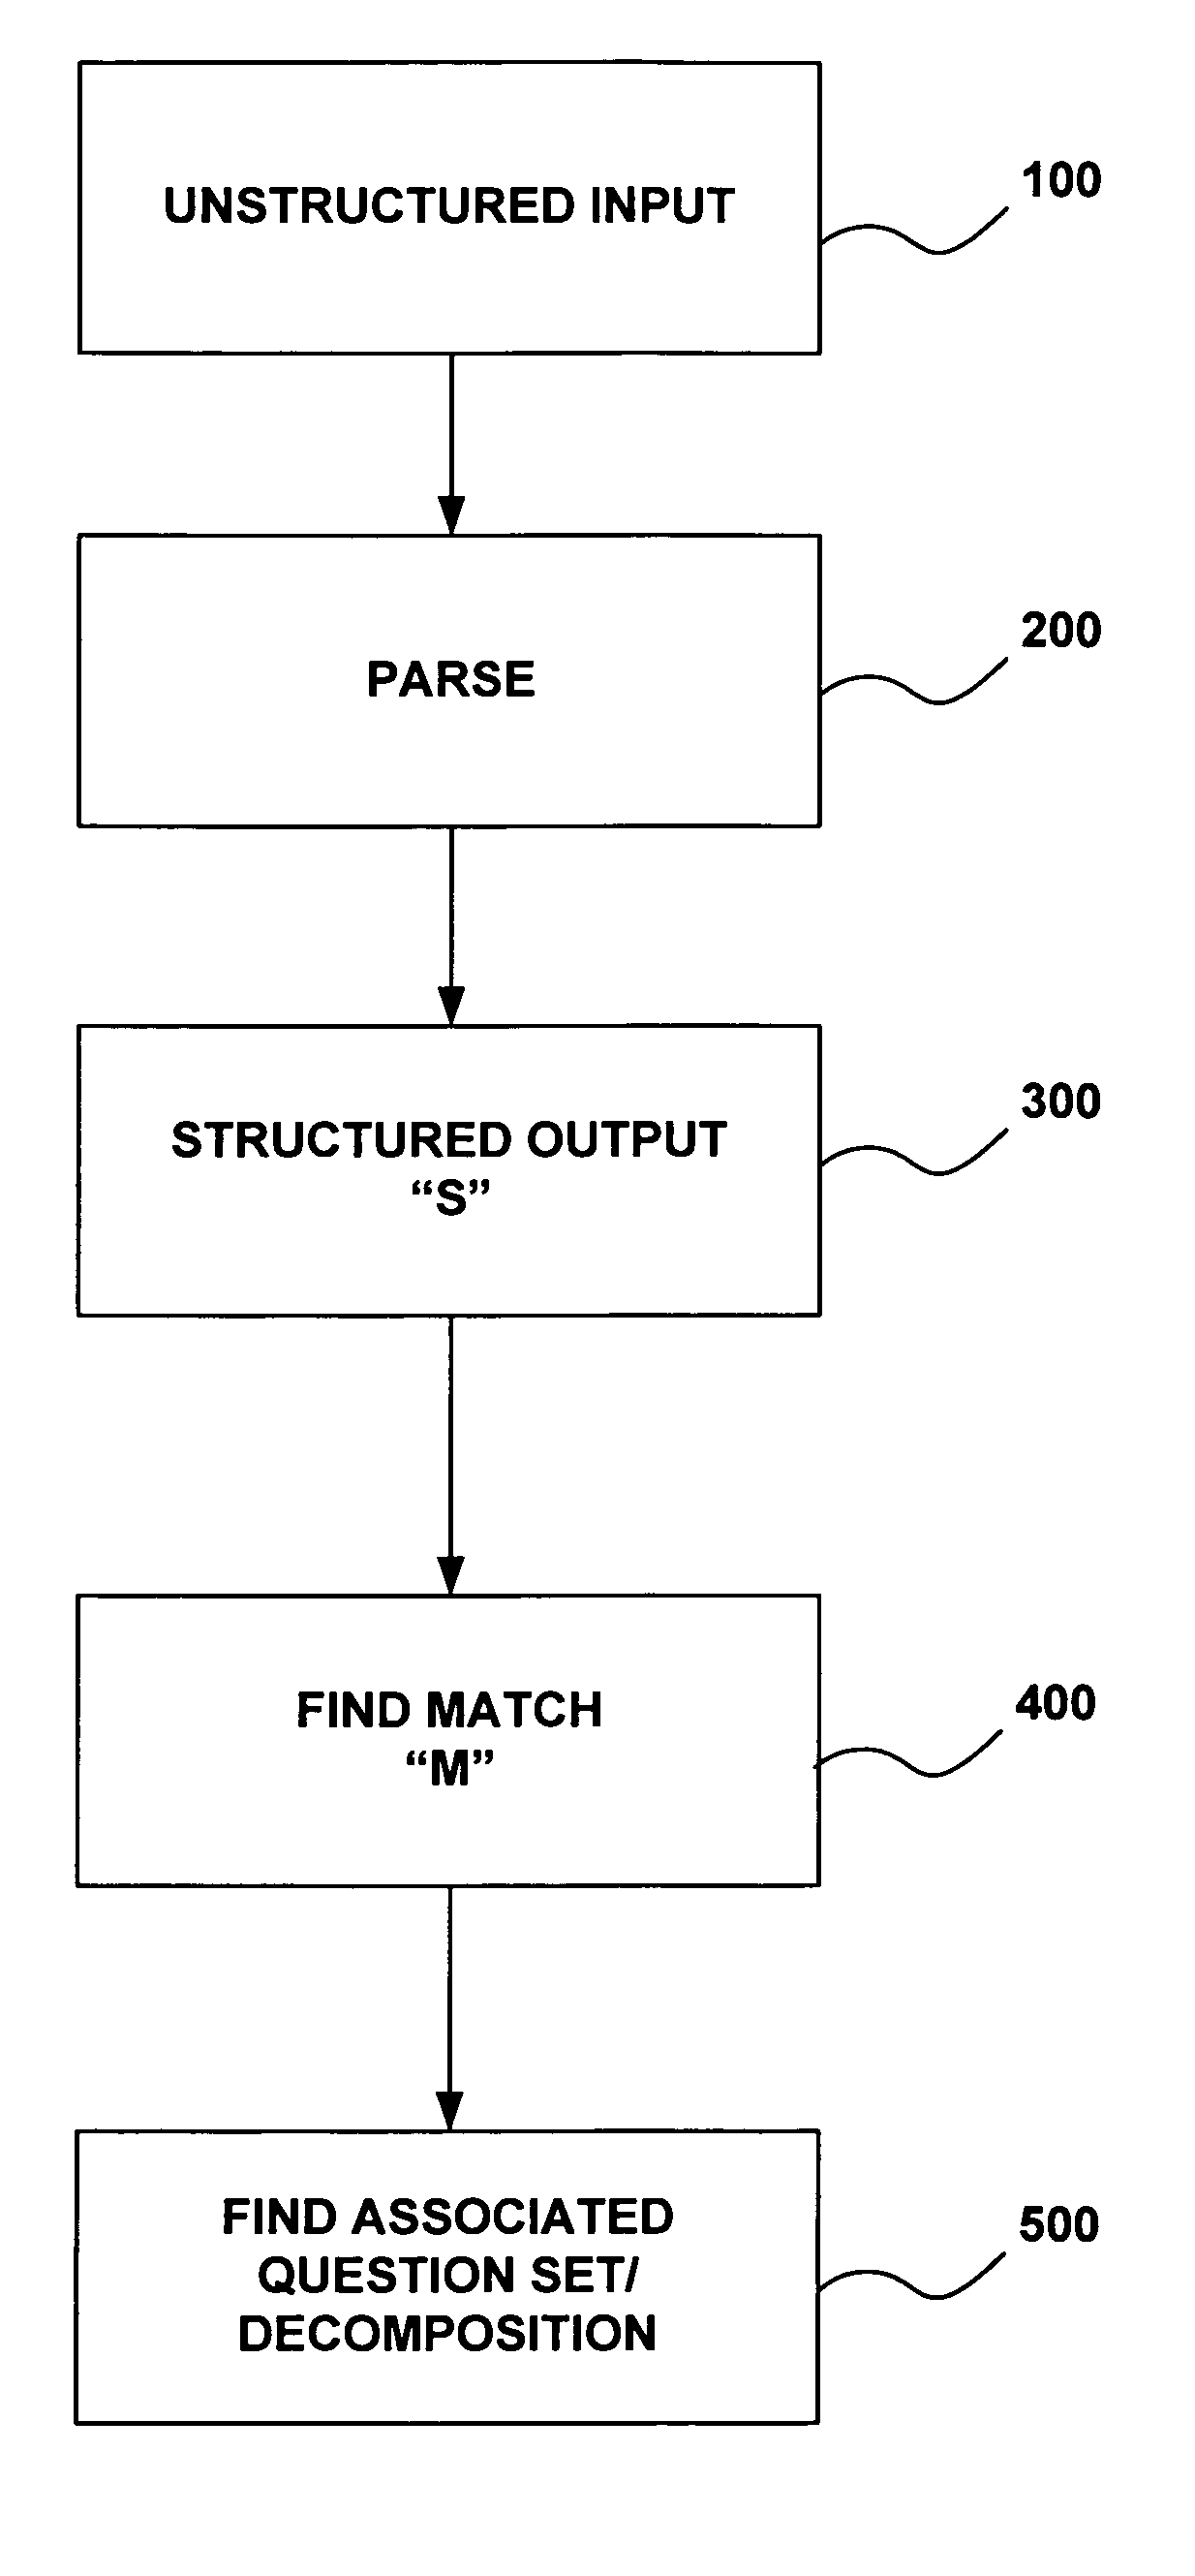 Apparatus and method for problem solving using intelligent agents